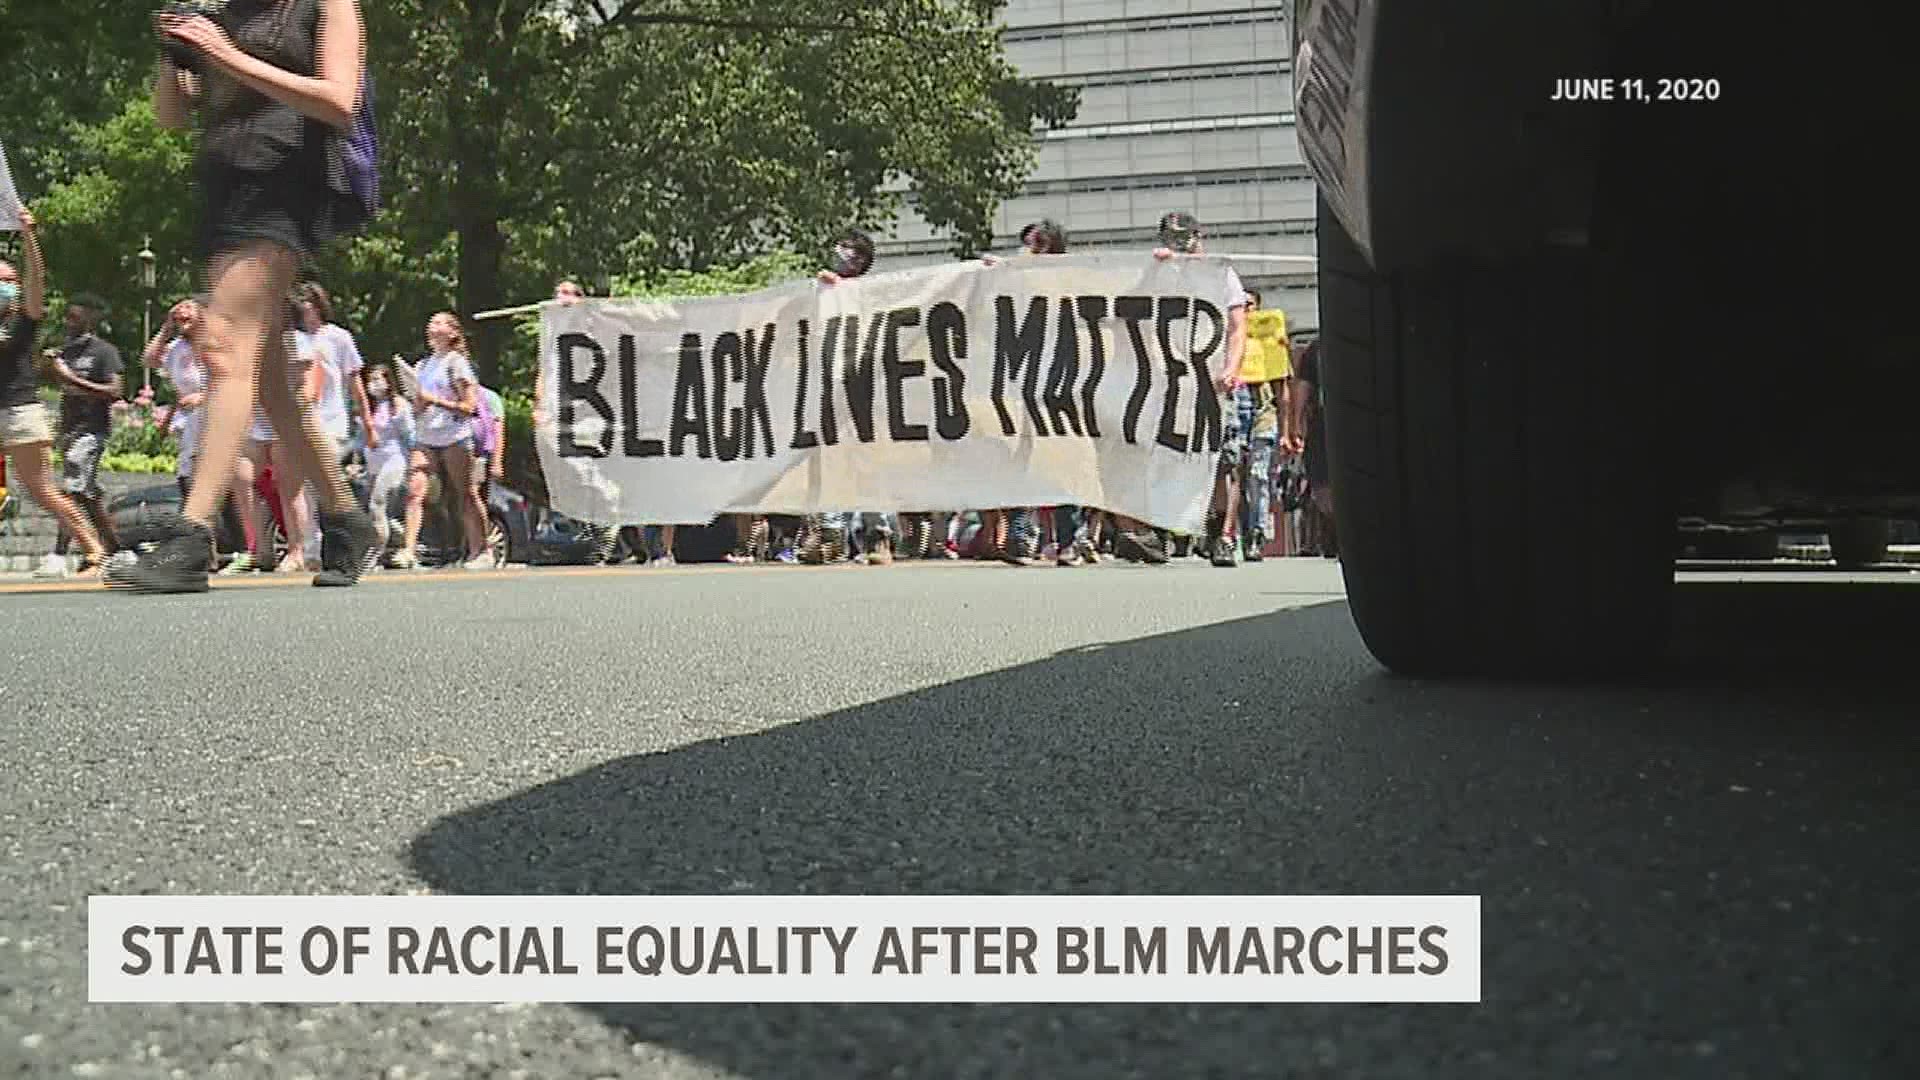 It's been eight months since people marched in BLM protests. What has changed since that time?